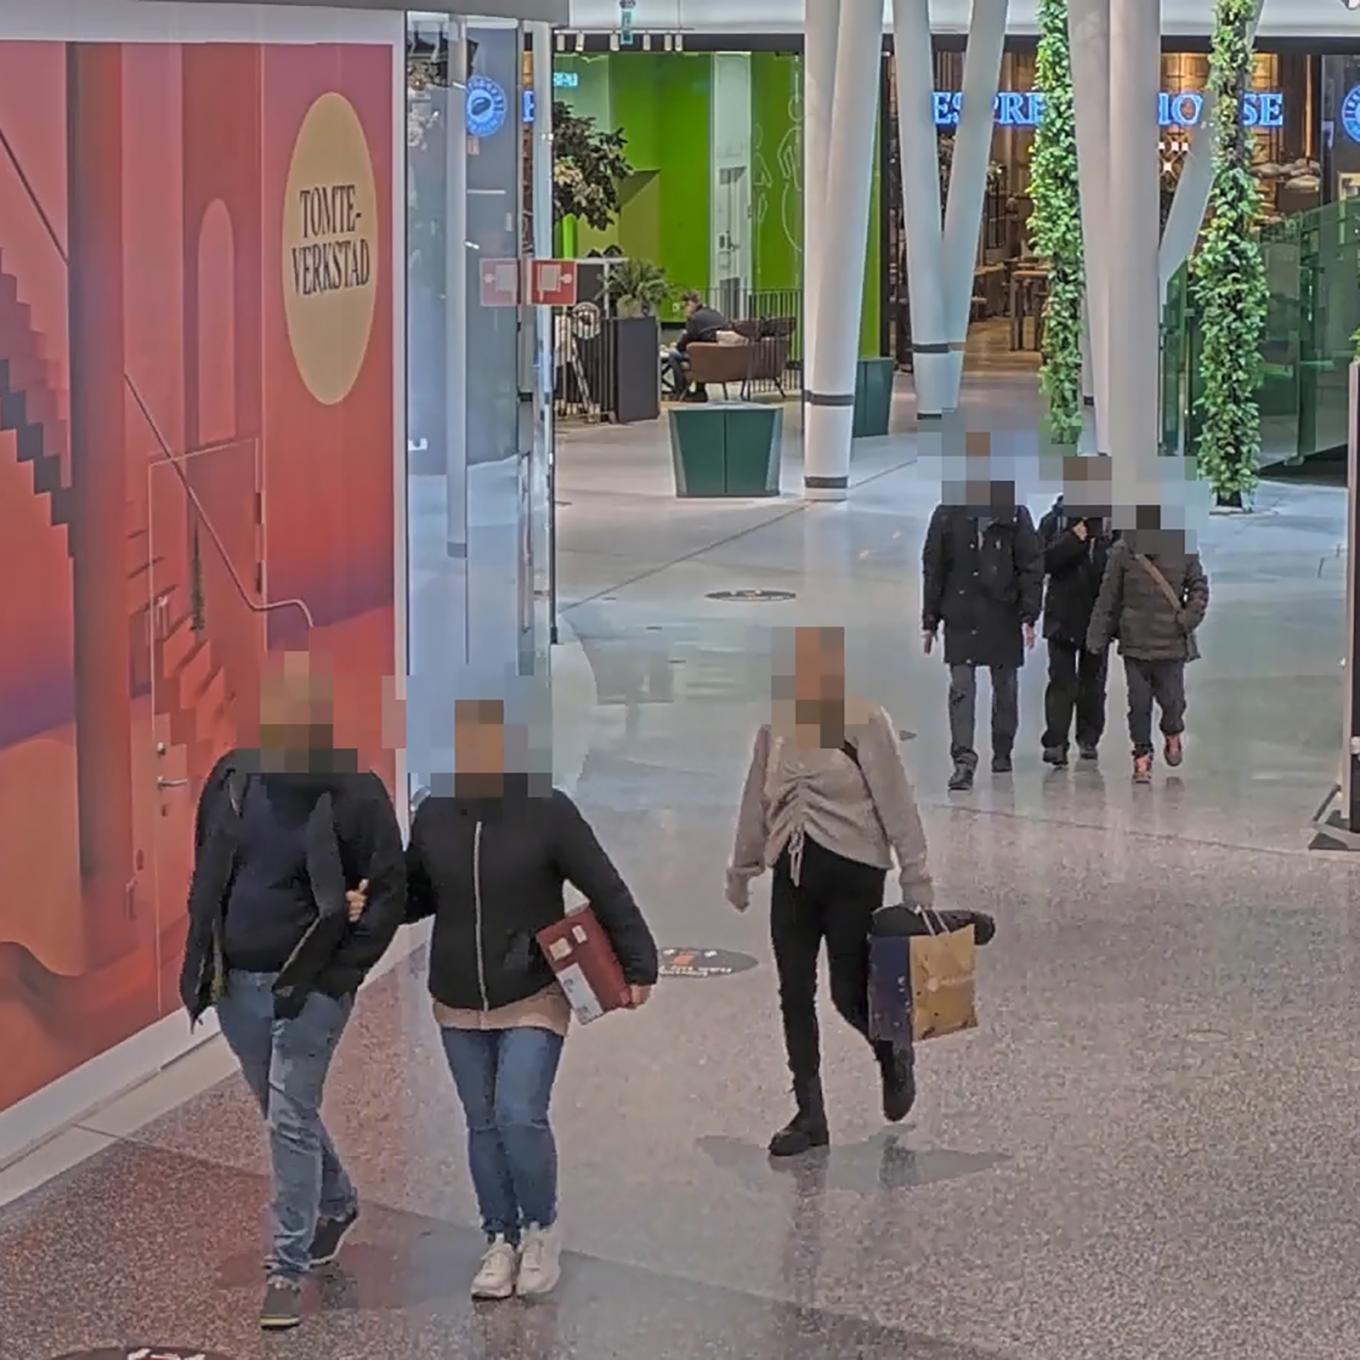 Public space with people with blurred faces due to AXIS Live Privacy Shield.